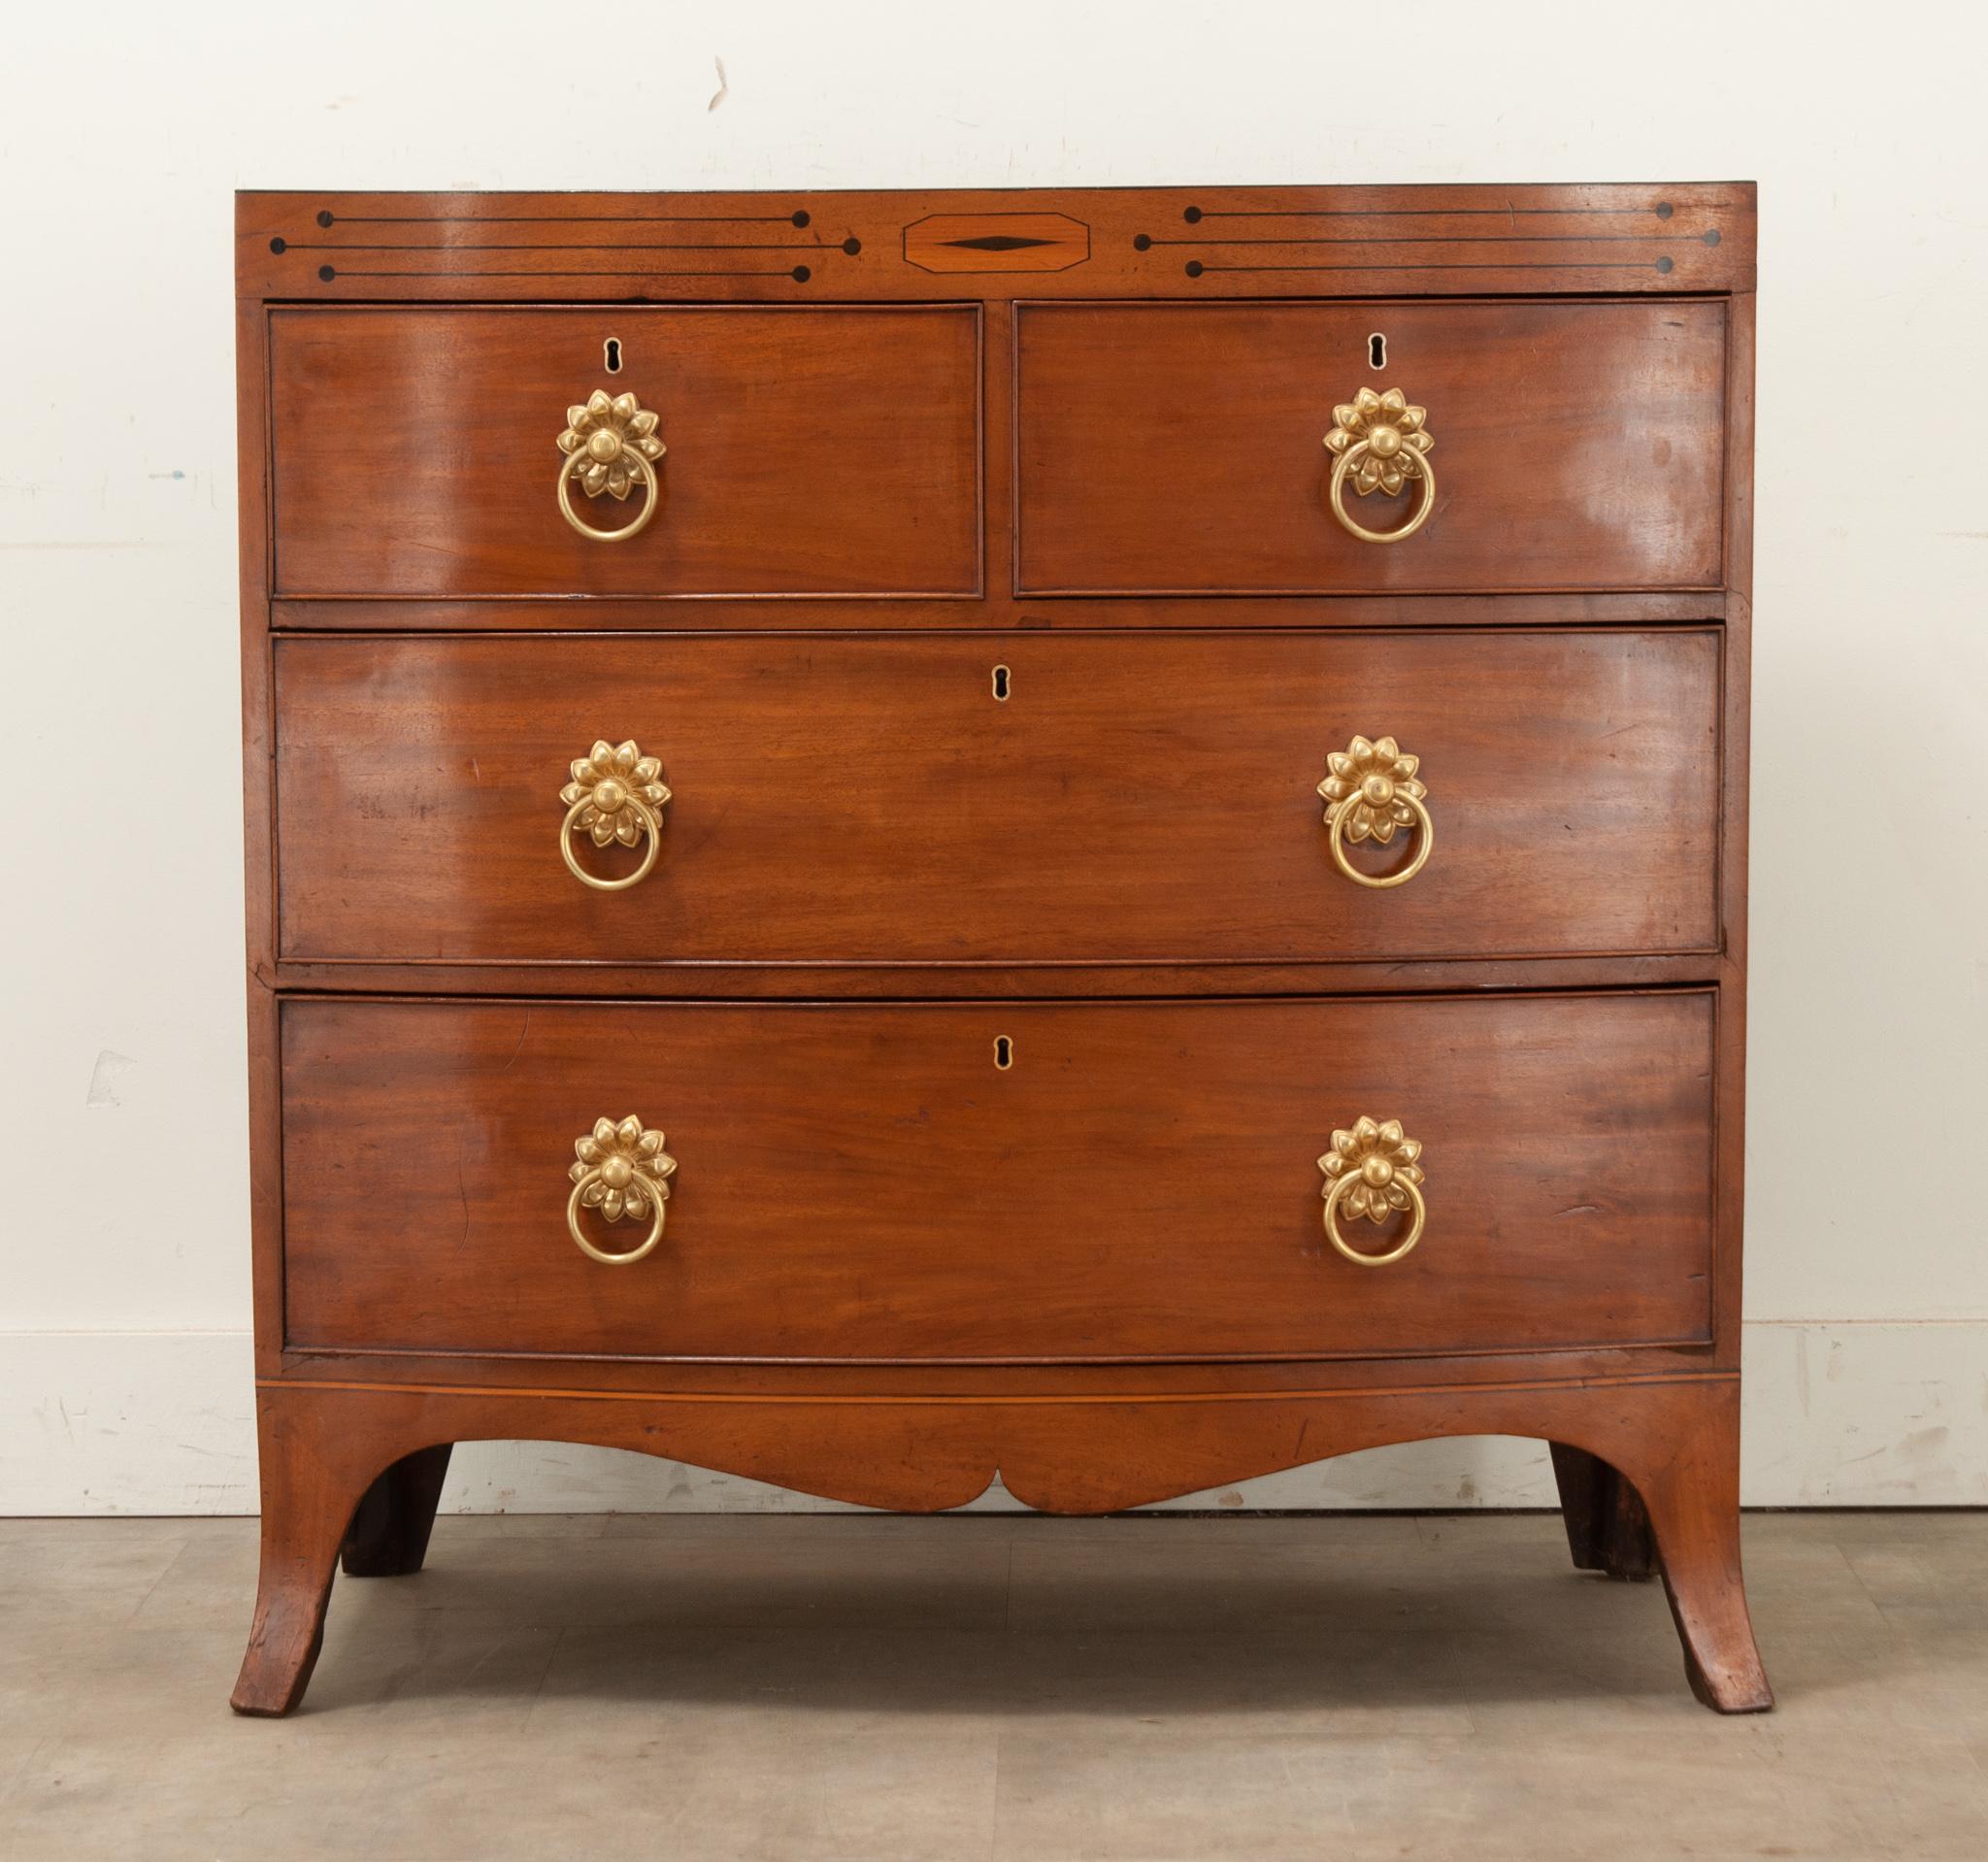 A stunning mahogany chest of drawers made in England. This four drawer chest features a linear composition with clean lines and a polished, finished presence. You’ll find geometric ebonized details above the drawers that set this little chest apart